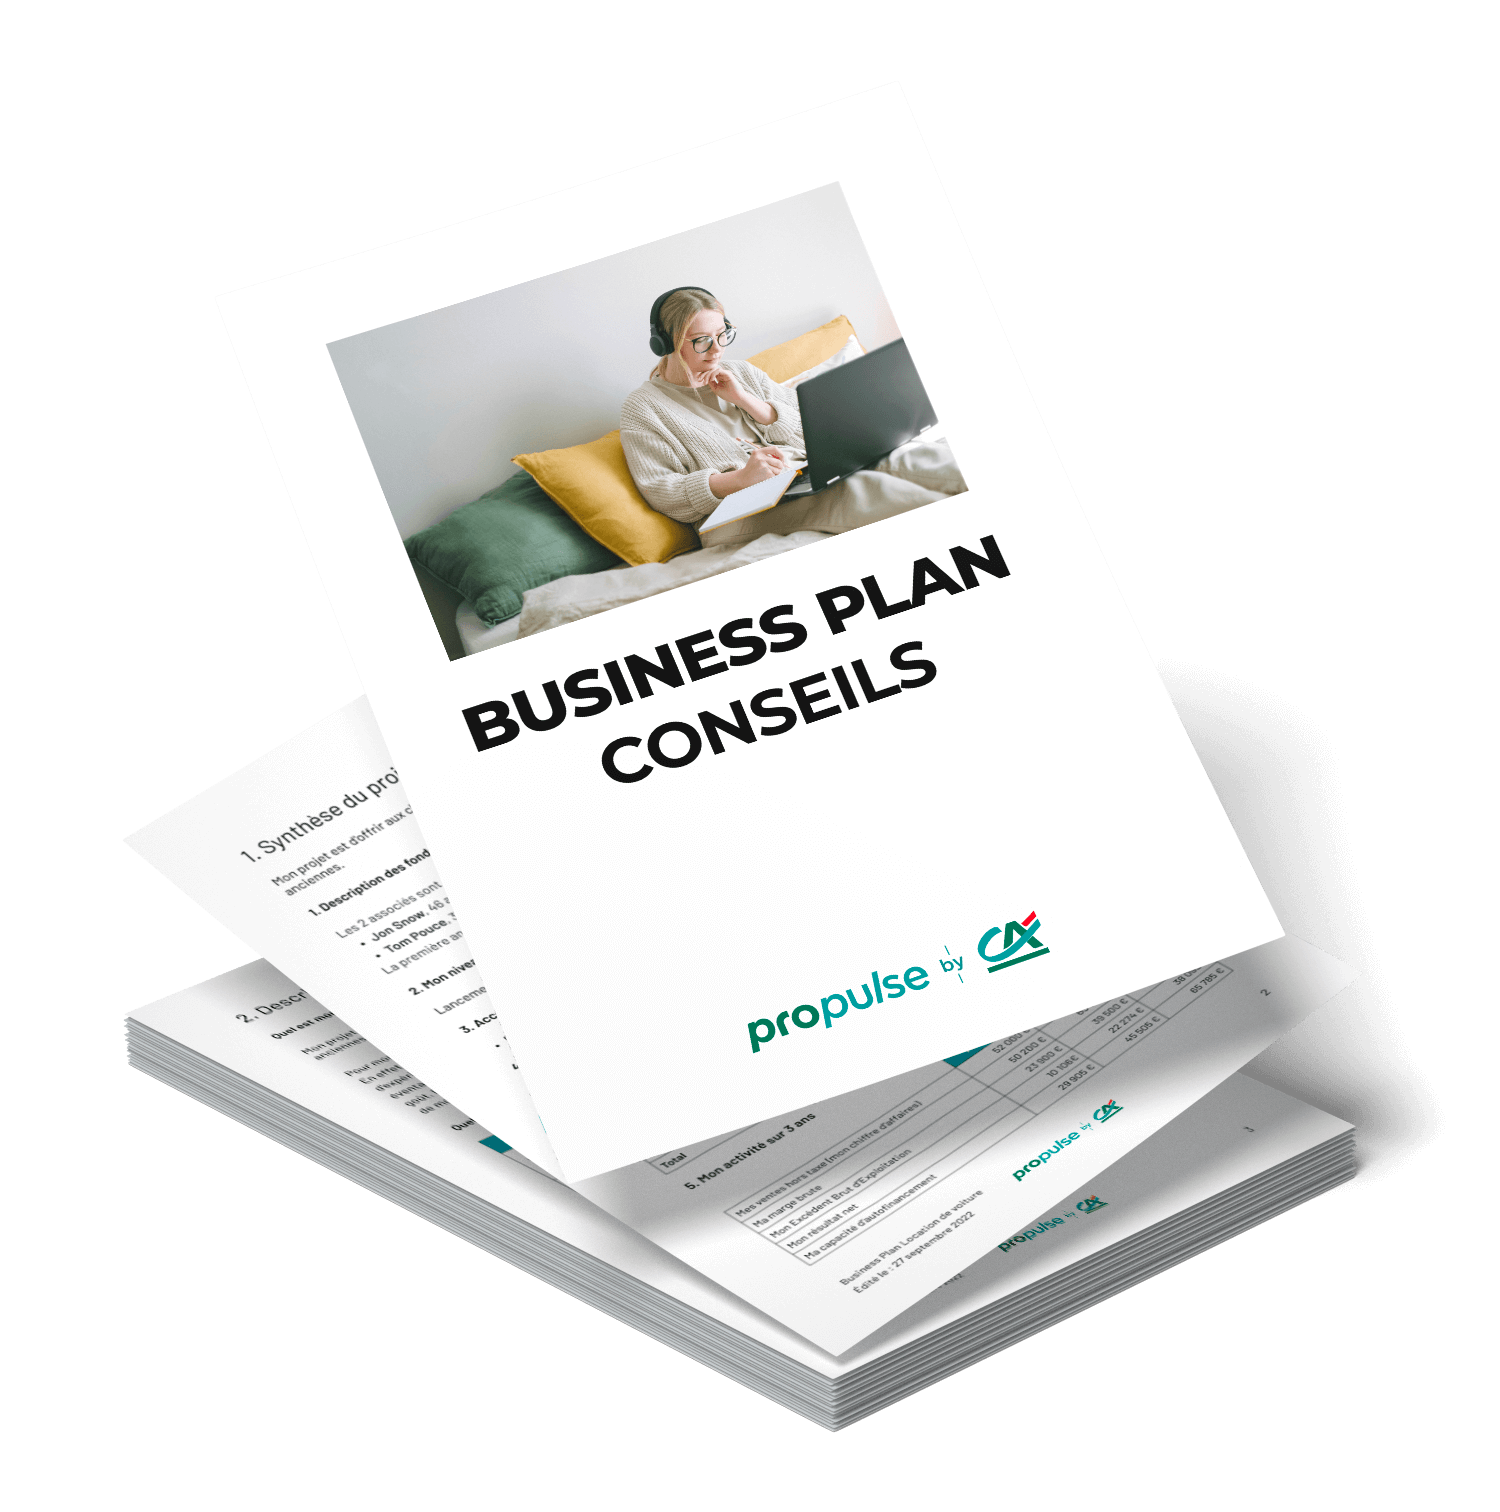 business plan consultant